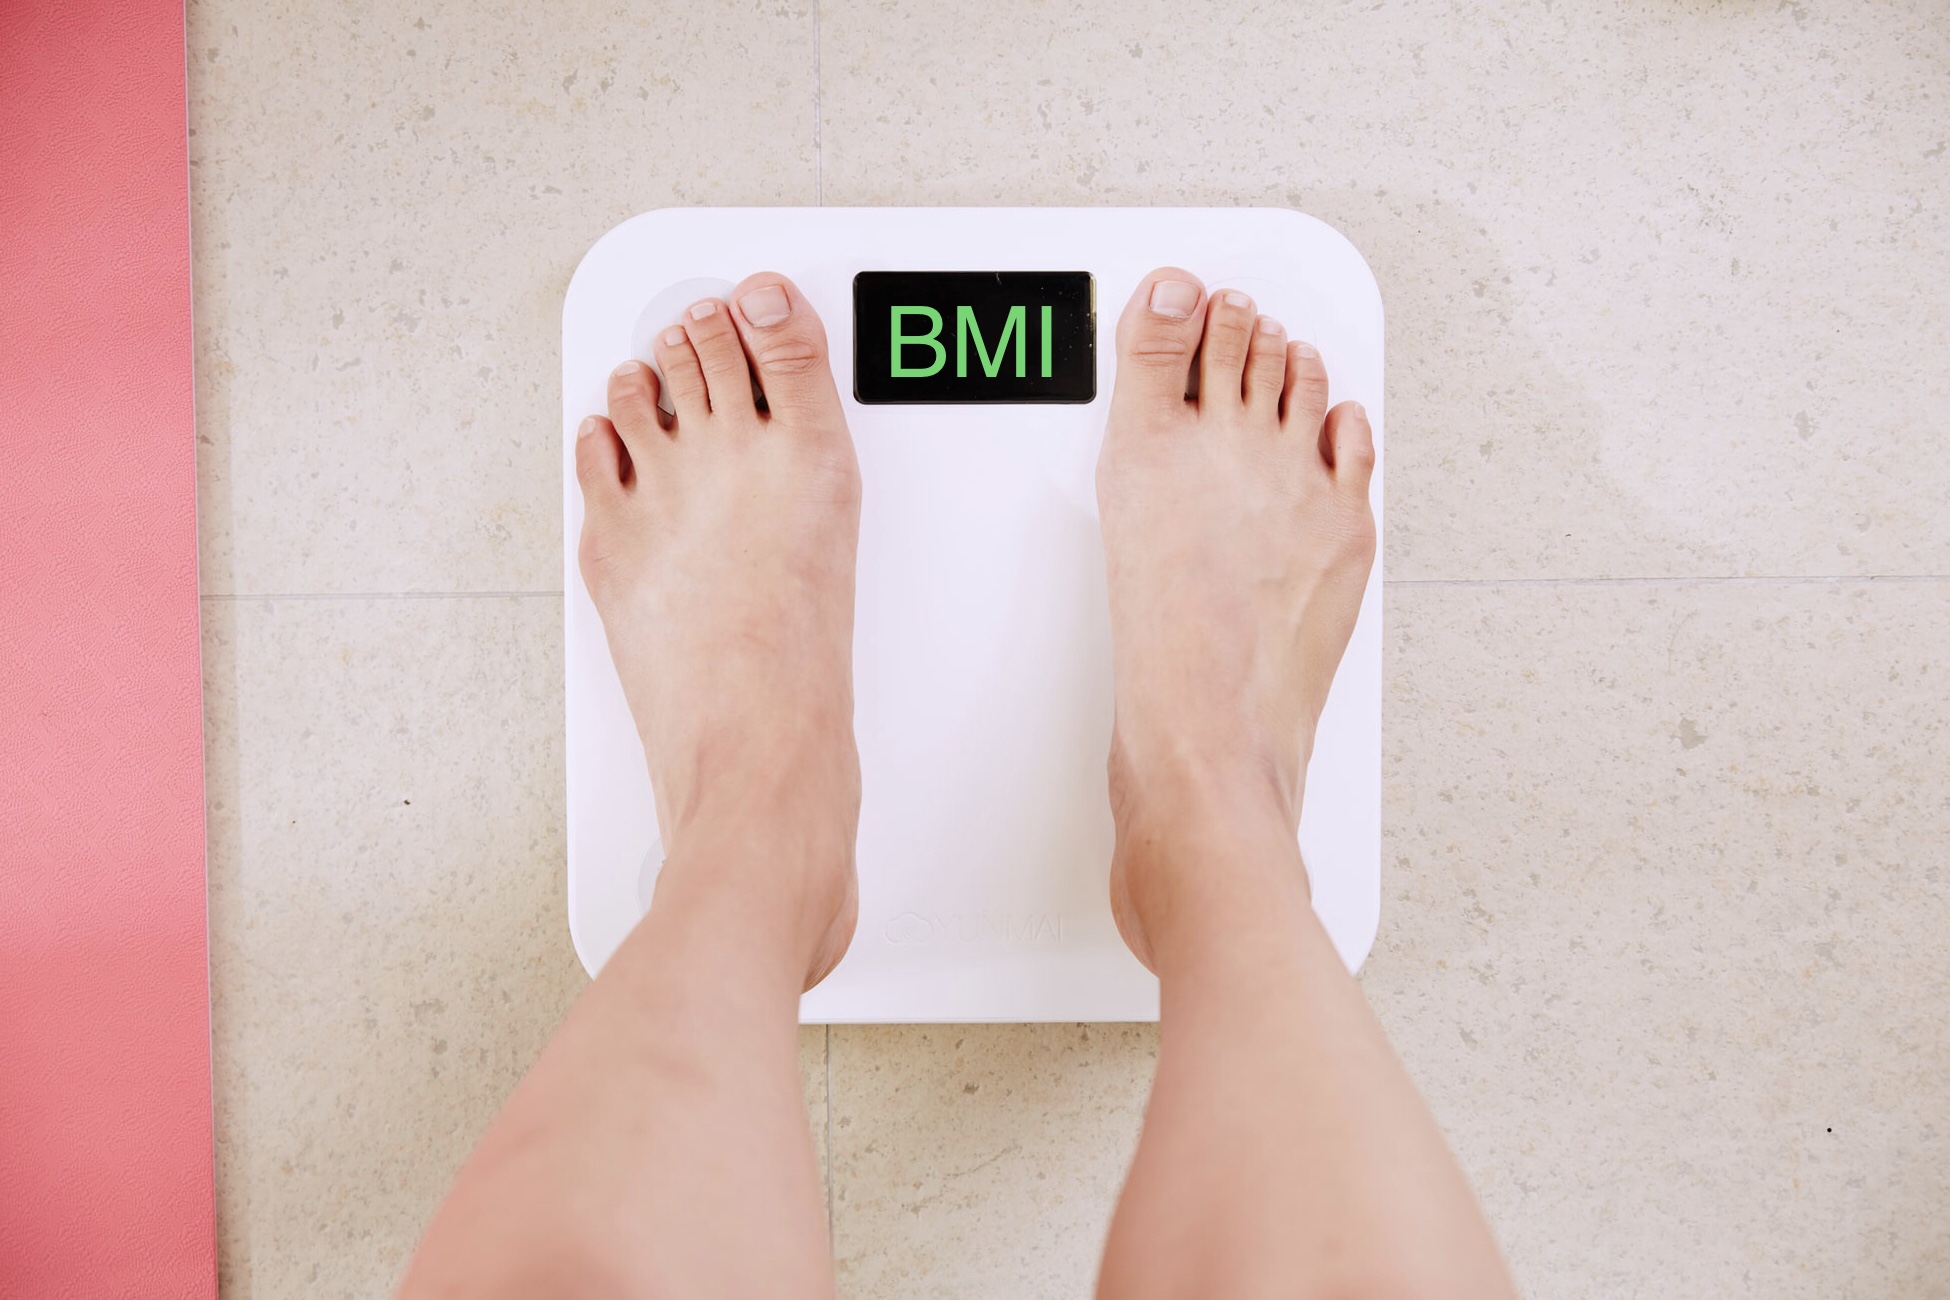 Healthy body weight is defined as a normal body mass index (BMI), which is between 18.5 and 24.9.